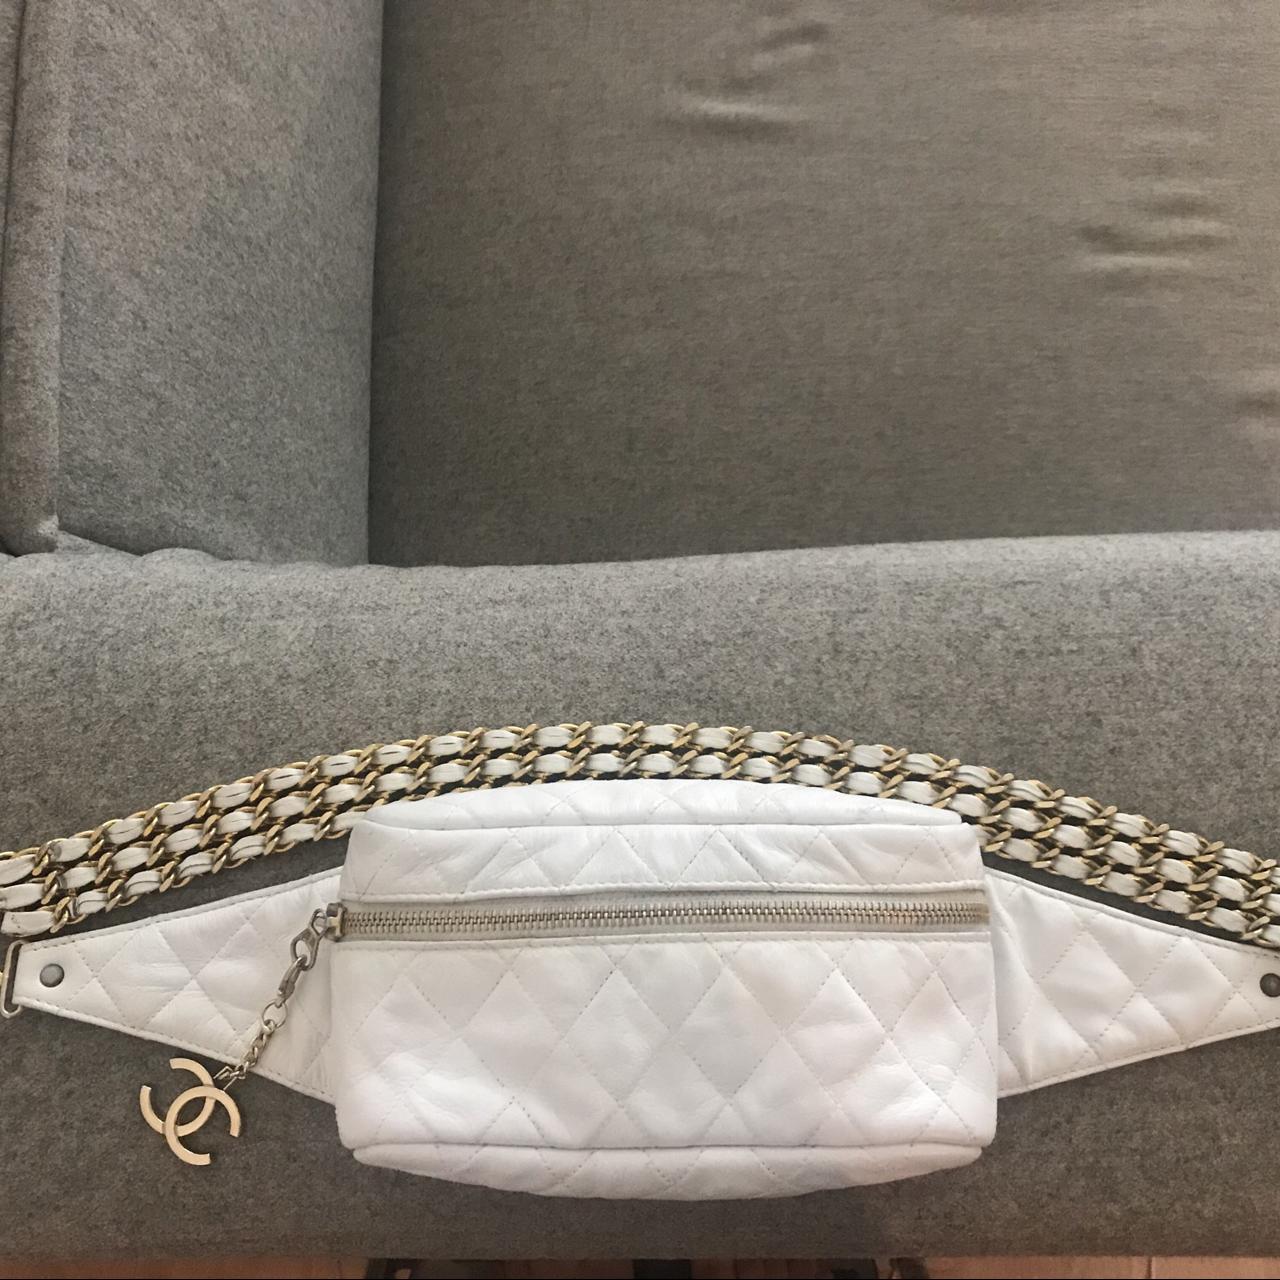 Vintage Chanel white quilted lambskin bum bag with - Depop